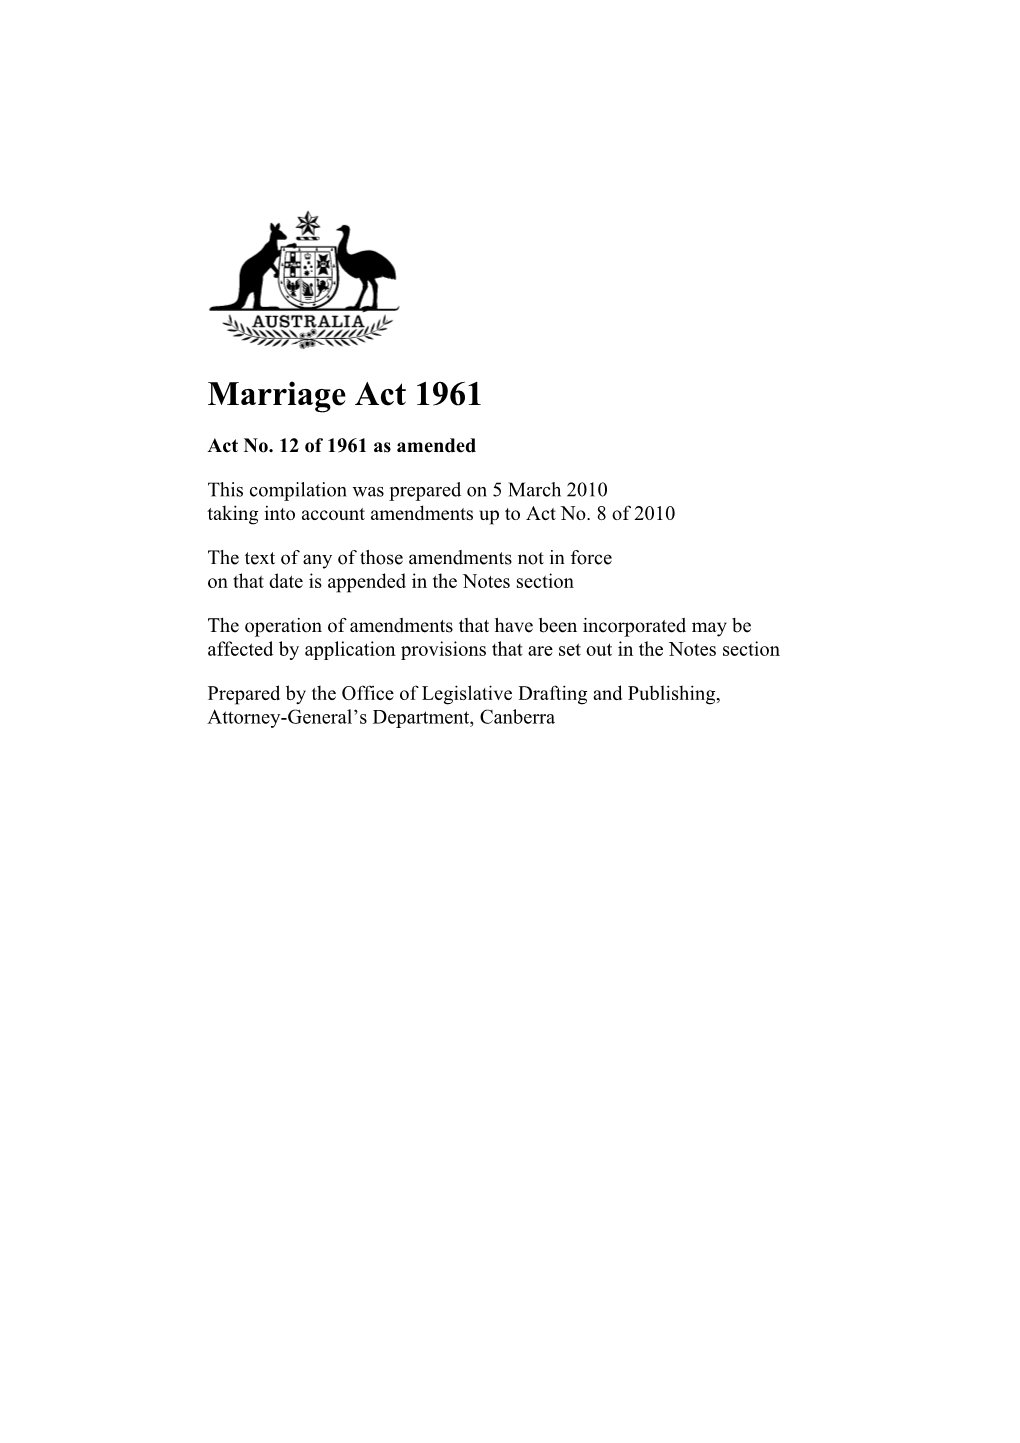 Act No.12 of 1961 As Amended